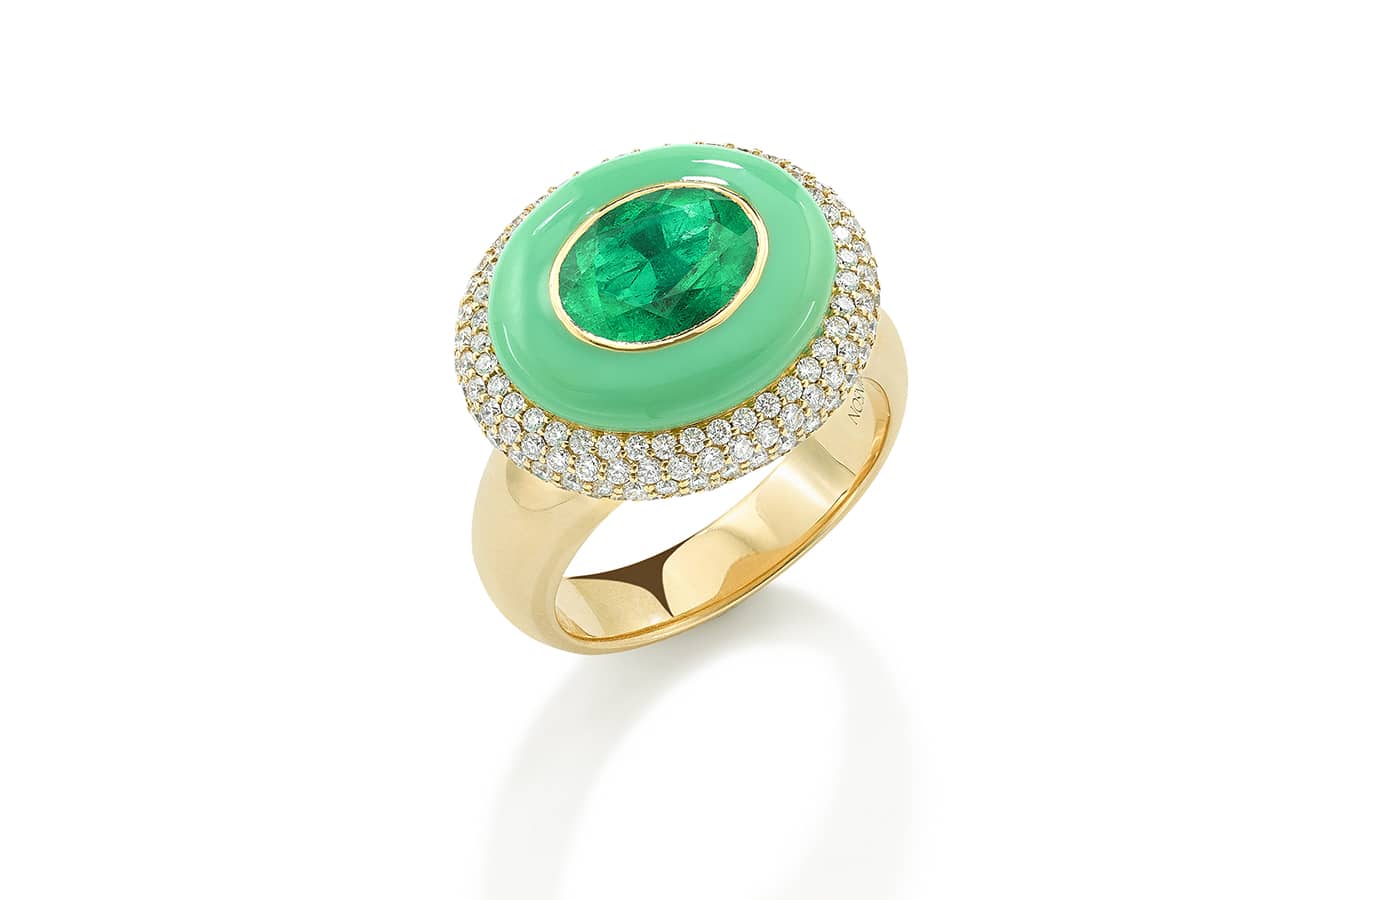 Robinson Pelham Arena ring set with a central oval 2.10ct Muzo emerald, with green enamel and pave diamonds totalling 1.20 carats